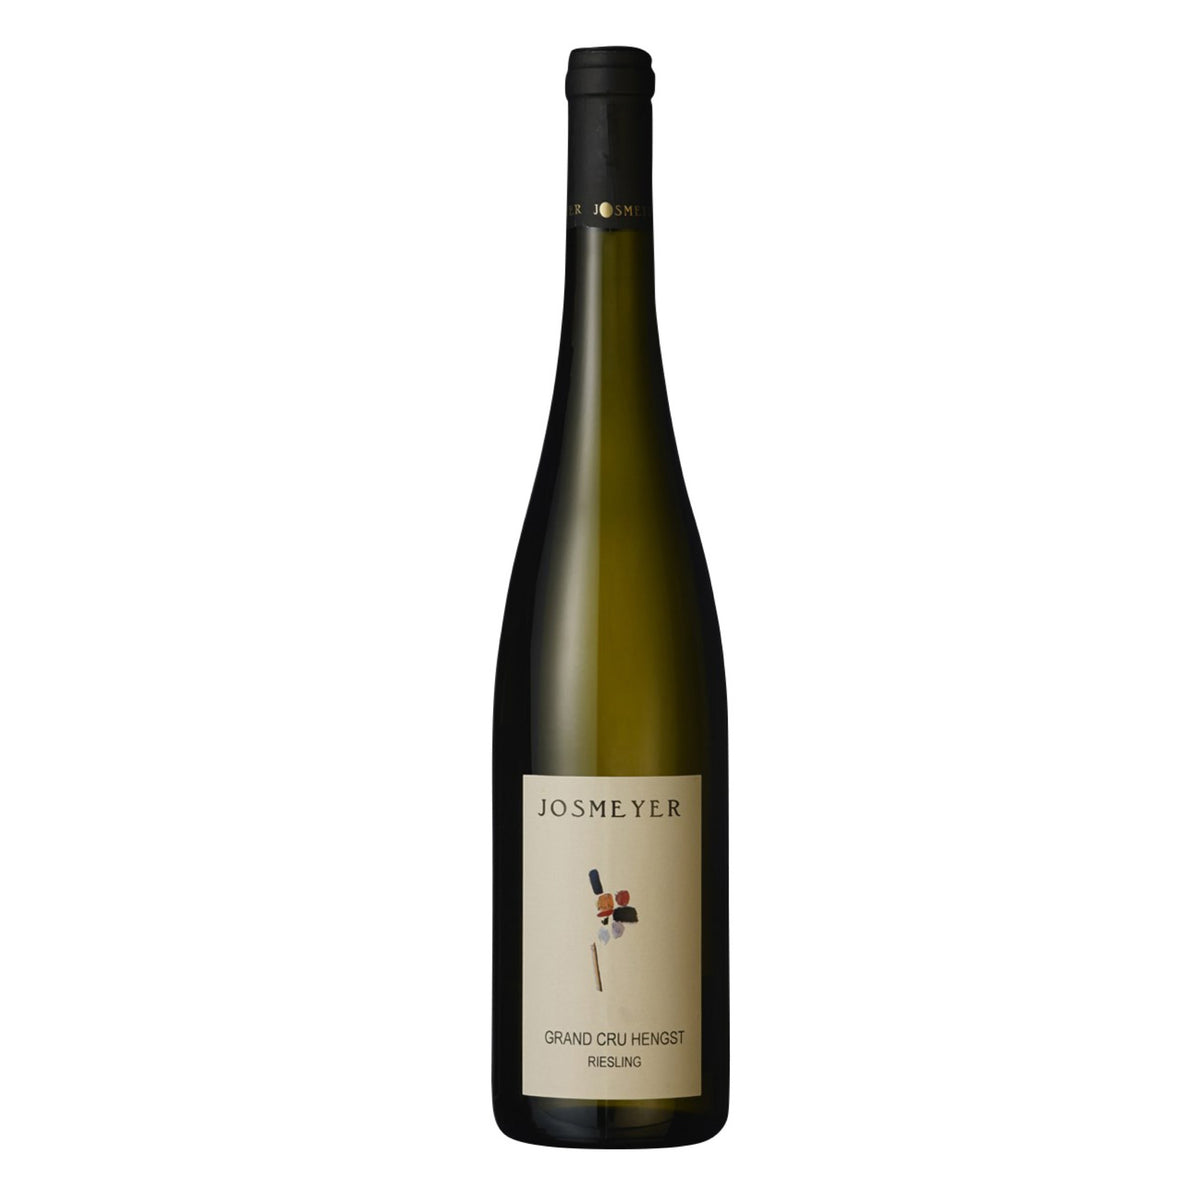 Domaine JOSMEYER Riesling Grand Cru &quot;Hengst&quot; 2011